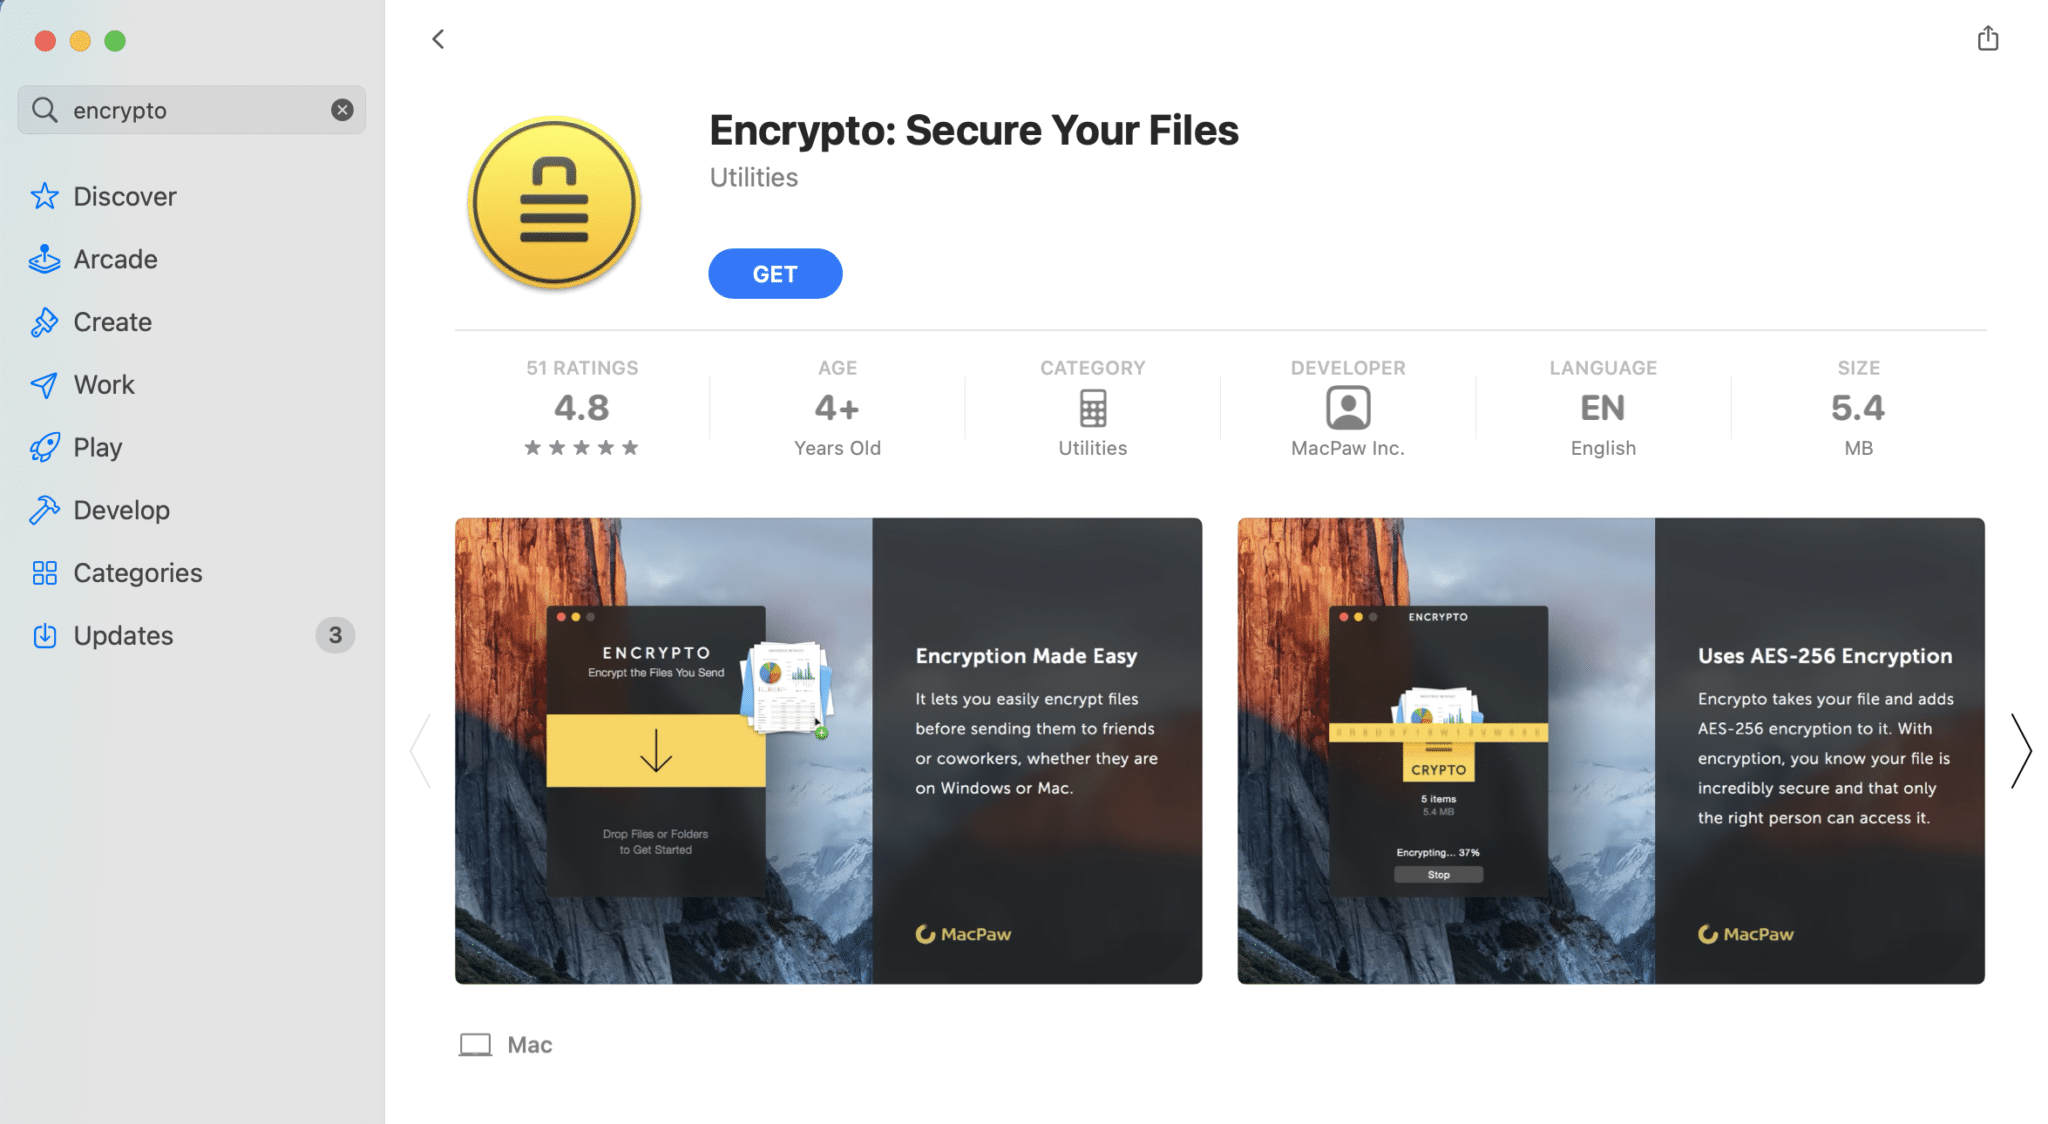 Installing the Encrypto application from the App Store. 